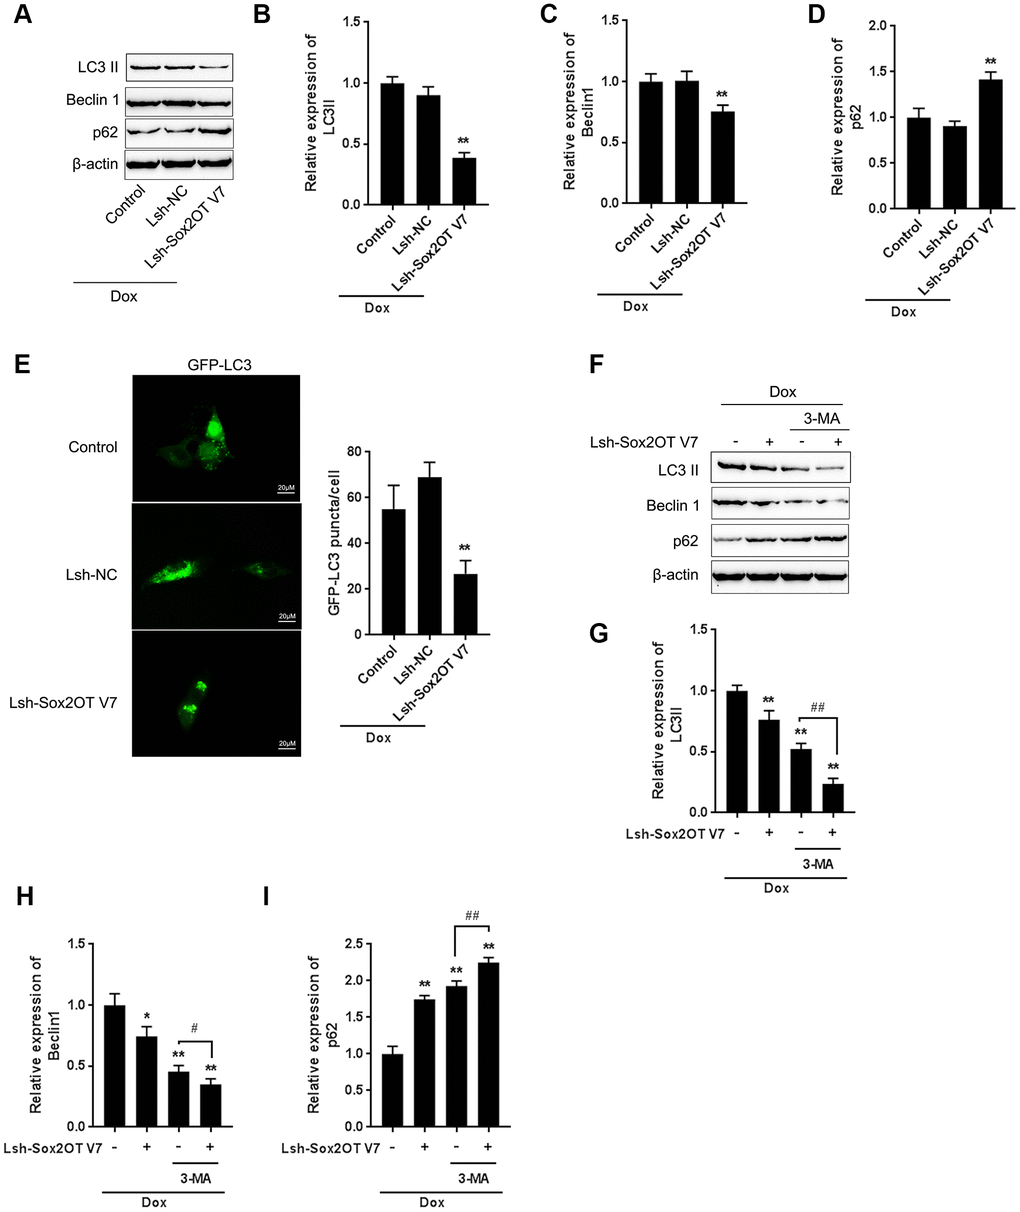 LncRNA Sox2OT-V7 silencing attenuates Dox-induced autophagy in OS cells. (A–D) Sox2OT-V7 silencing in U2OS cells was achieved by infection with Lsh-Sox2OT-V7. Sox2OT-V7-silenced U2OS cells were treated with Dox, and examined for the protein levels of LC3II, Beclin 1, and p62 were examined. (E) Sox2OT-V7-silenced U2OS cells with stable eGFP-LC3 expression were treated with Dox (5 μM) for 24 h, and the formation of puncta was examined by using a confocal microscope. Representative images are presented. (F–I) Sox2OT-V7-silenced U2OS cells were cotreated with Dox (5 μM) and 3-MA (5 μM) for 24 h, and he protein levels of LC3 II, Beclin 1, and p62 were examined. The data are presented as the mean ± SD of three independent experiments. *PPPP